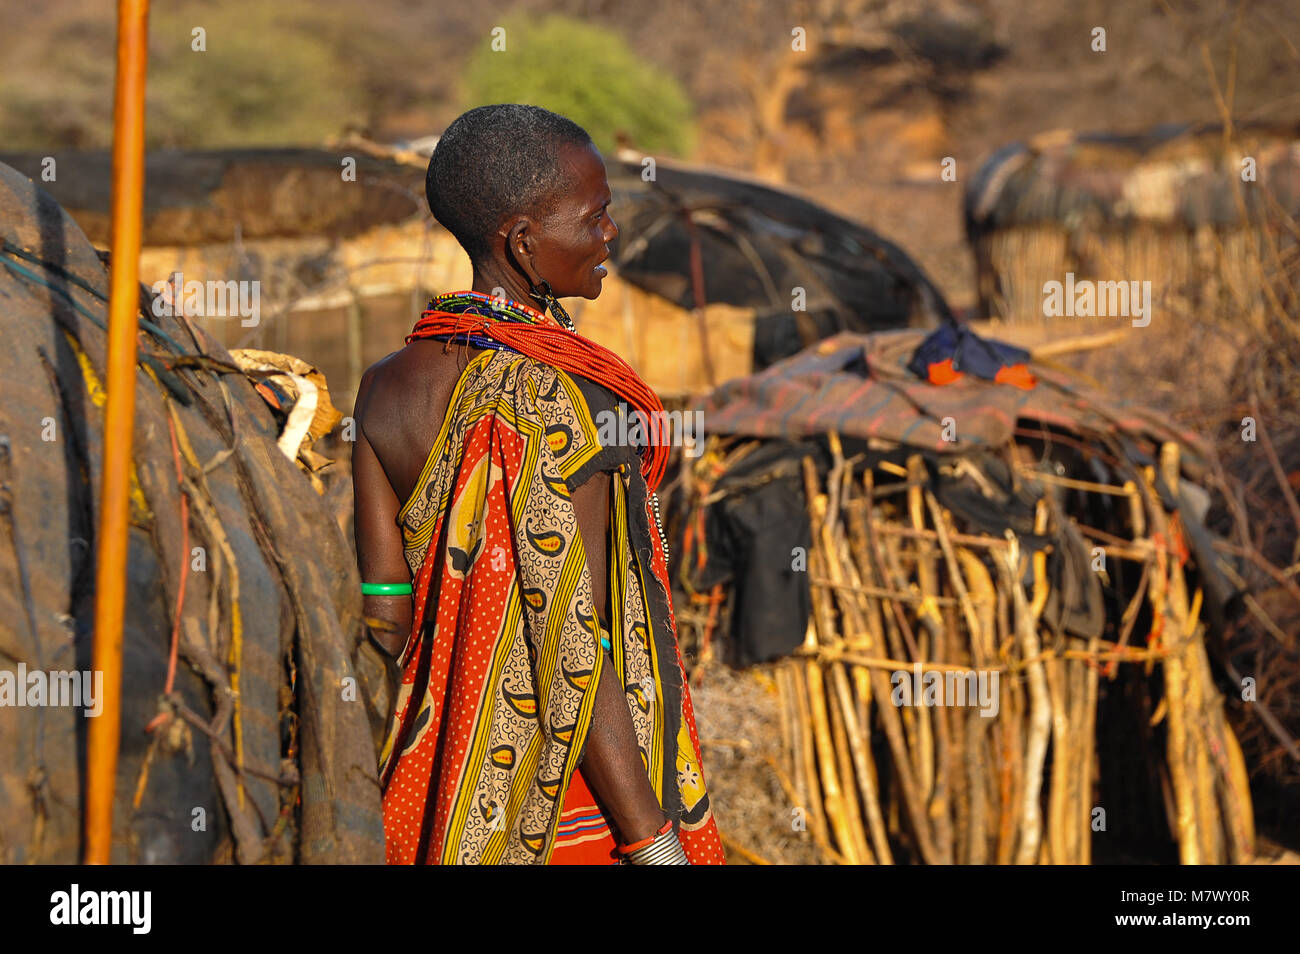 African tribeswoman wearing colourful dress stands with back to camera in traditional village or kraal. Portrait showing woman wearing ornate jewellry Stock Photo